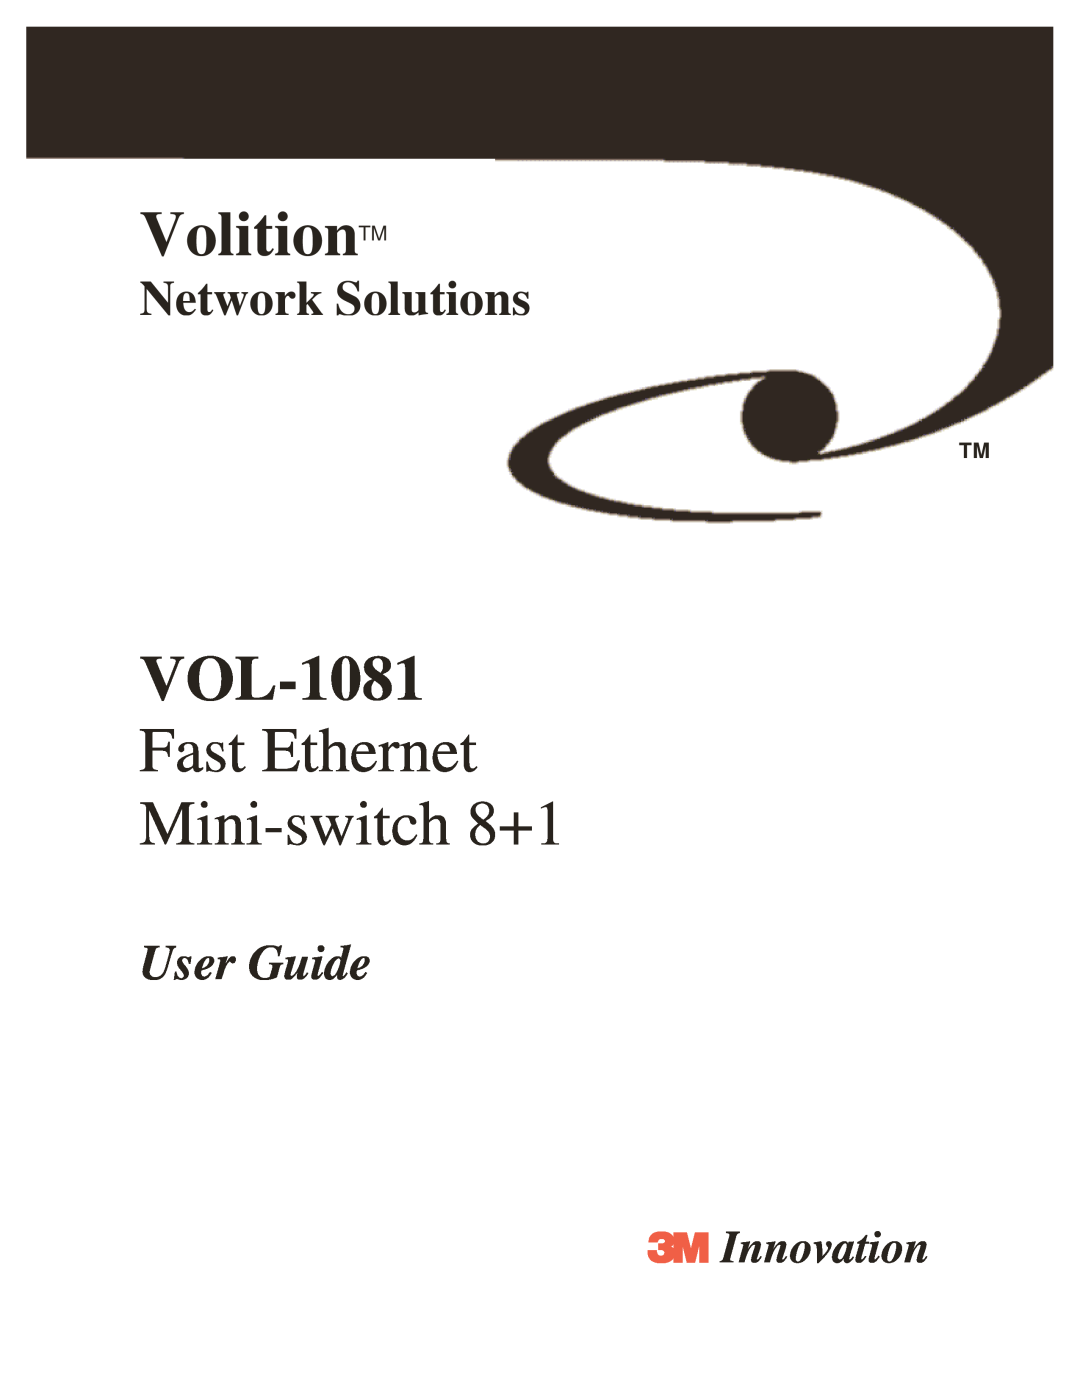 3M VOL-1081 manual VolitionTM, Fast Ethernet Mini-switch 8+1, Network Solutions, User Guide, ÿ Innovation 